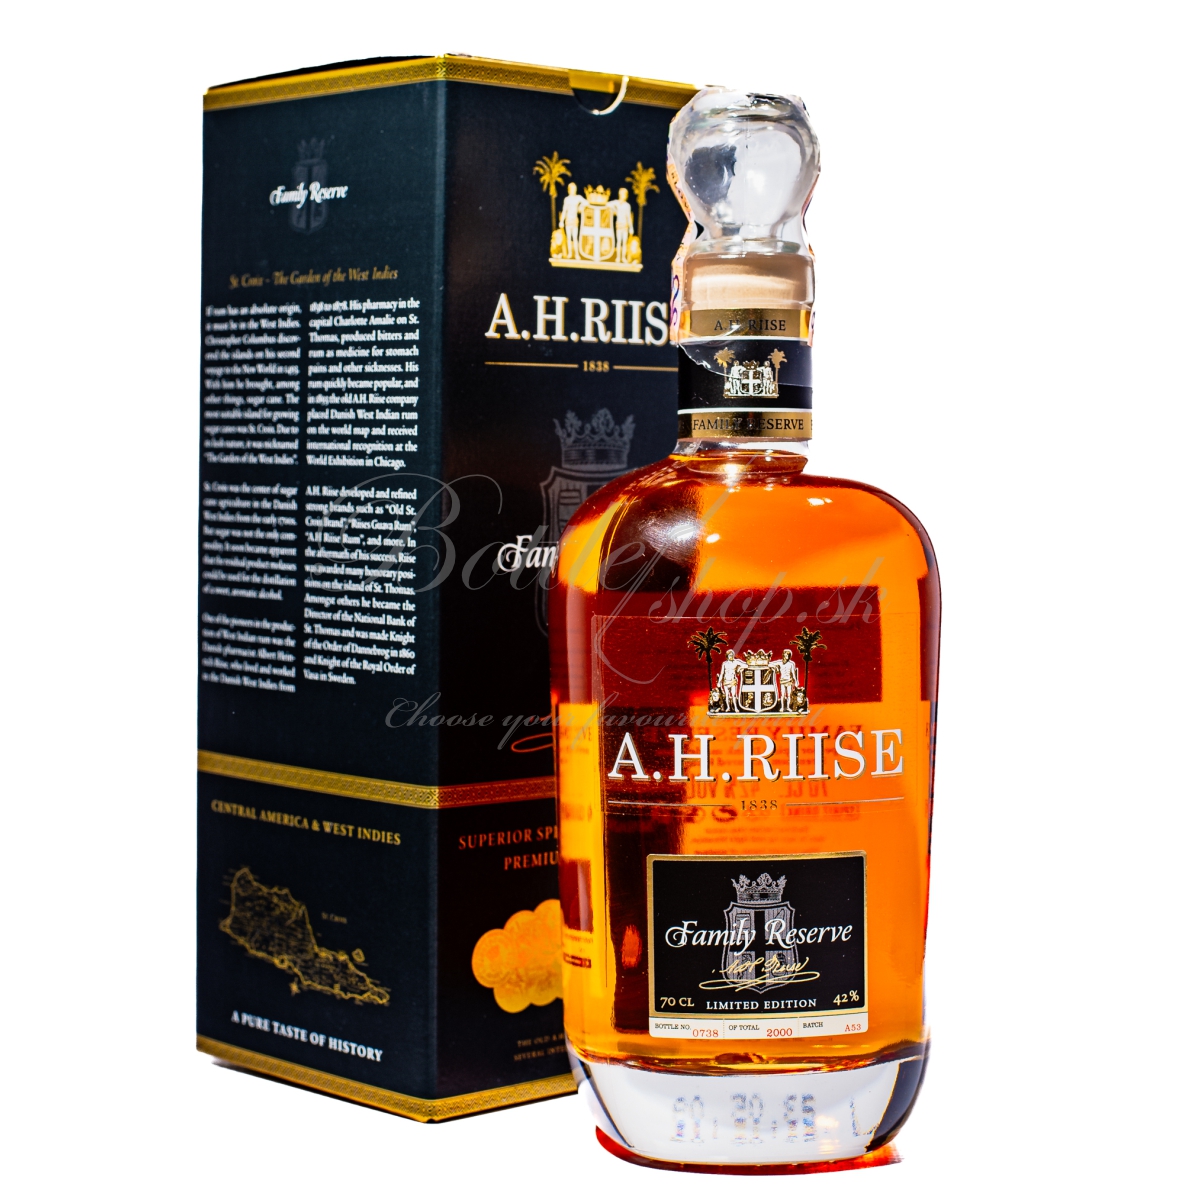 a.h. riise family reserve 1838 0,7l